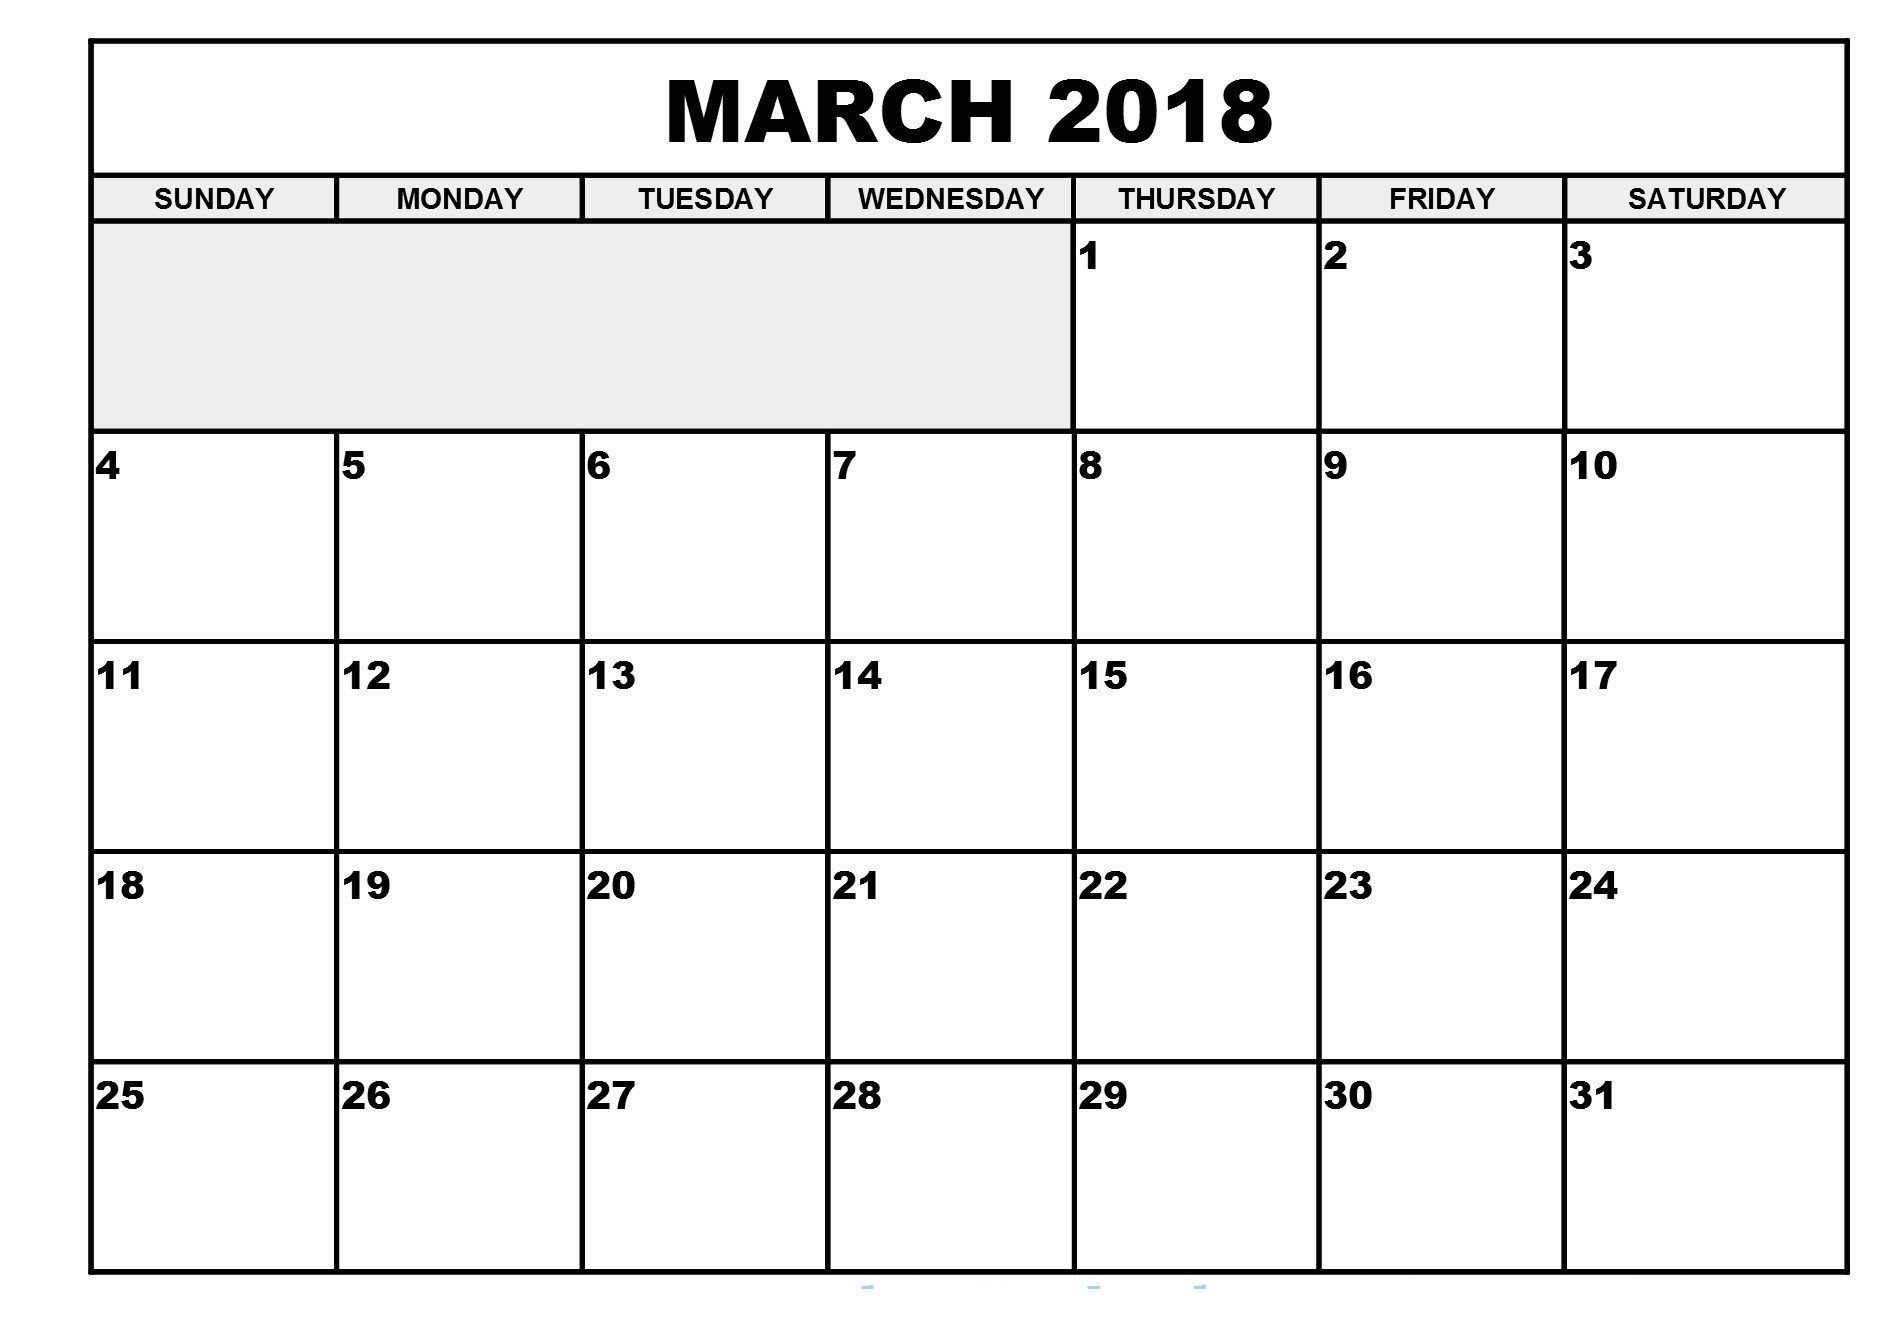 Print Calendar Without Download In 2020 | Print Calendar